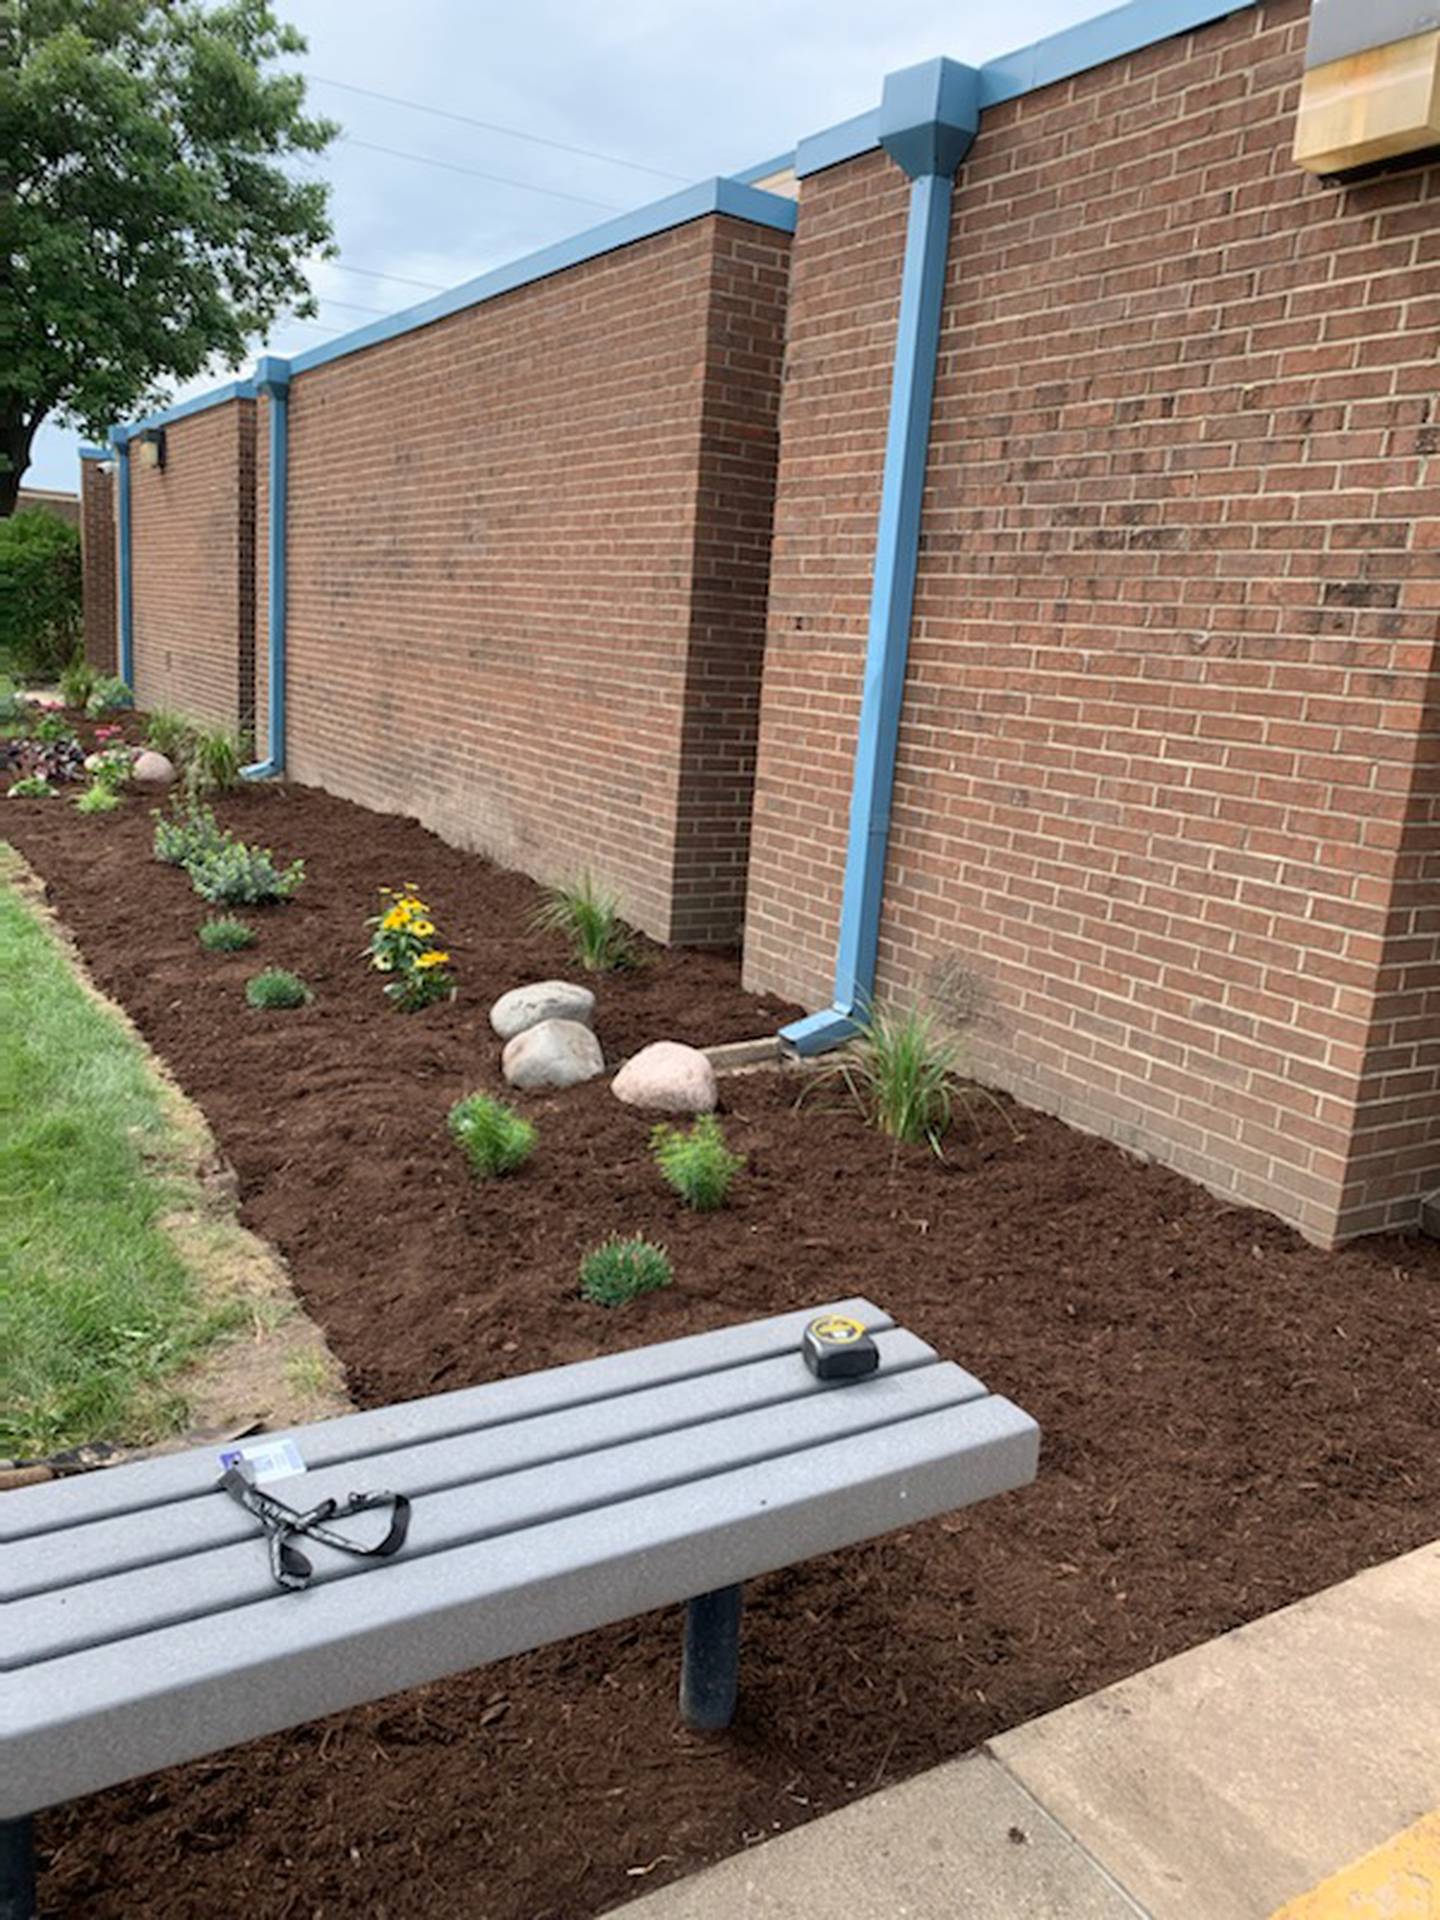 Newly-planted flowers spruce up the front of Centennial School in Streator.